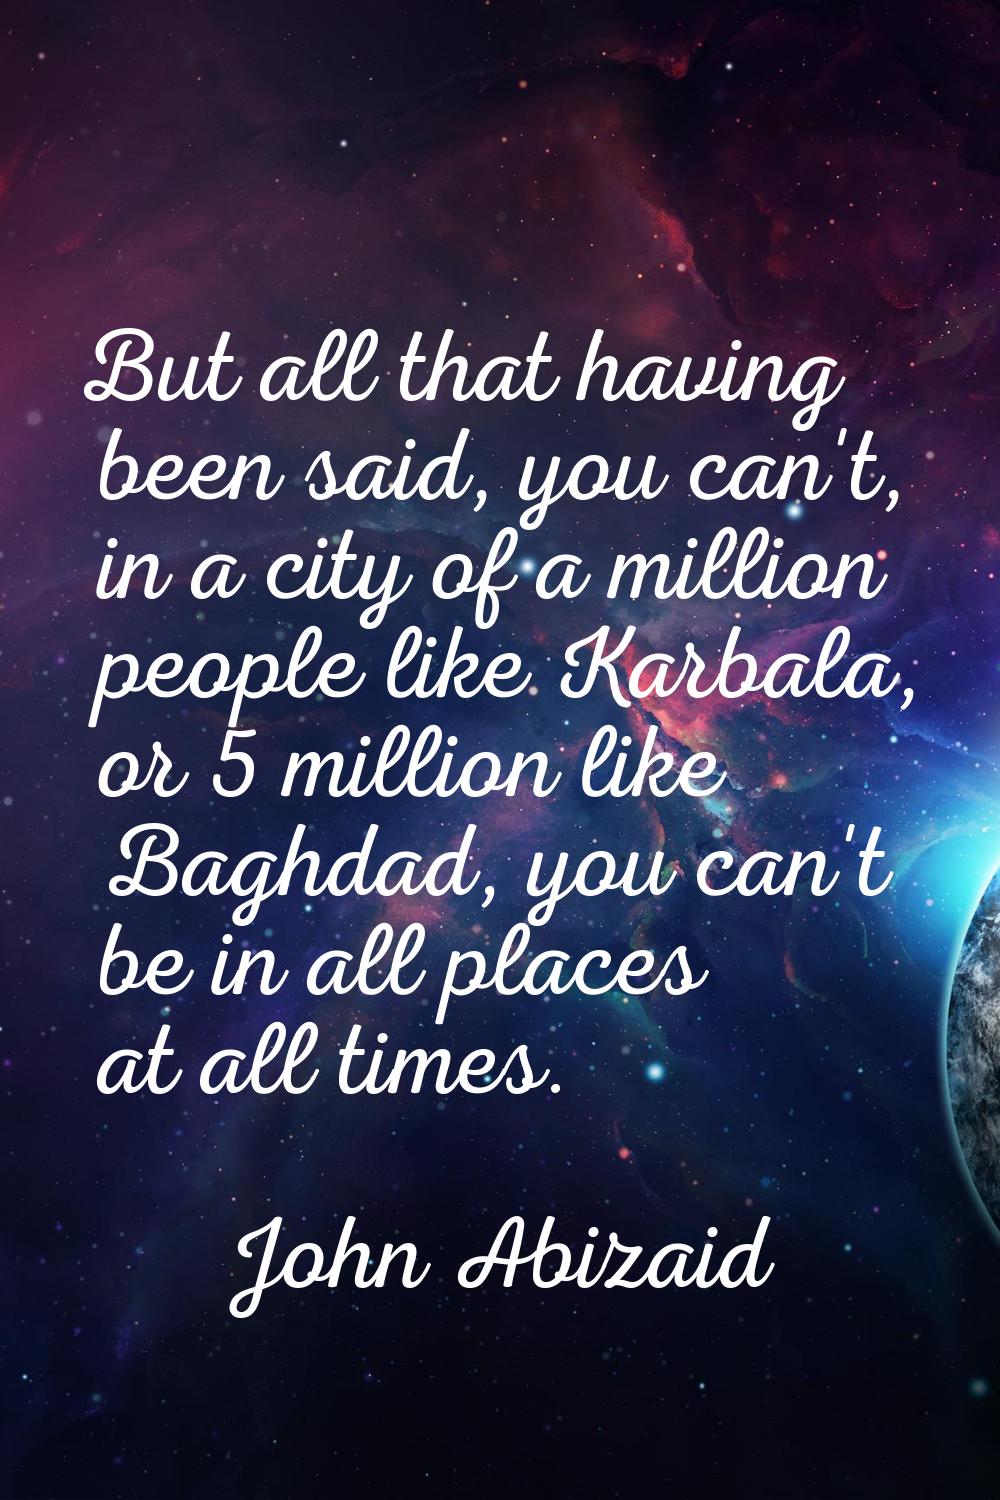 But all that having been said, you can't, in a city of a million people like Karbala, or 5 million 